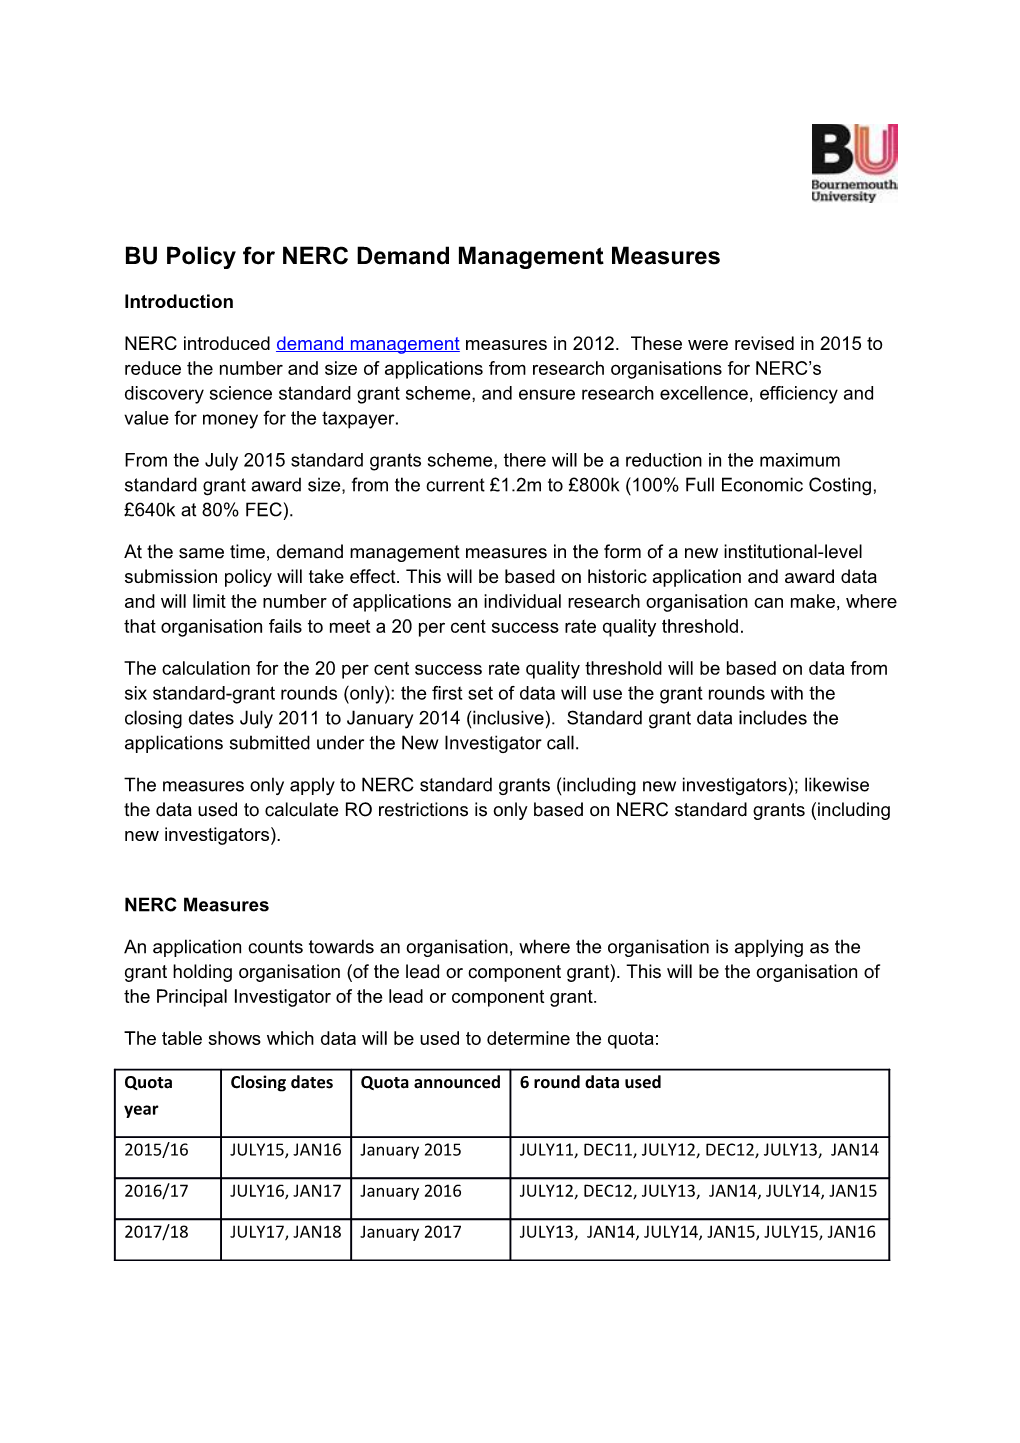 BU Policy for NERC Demand Management Measures